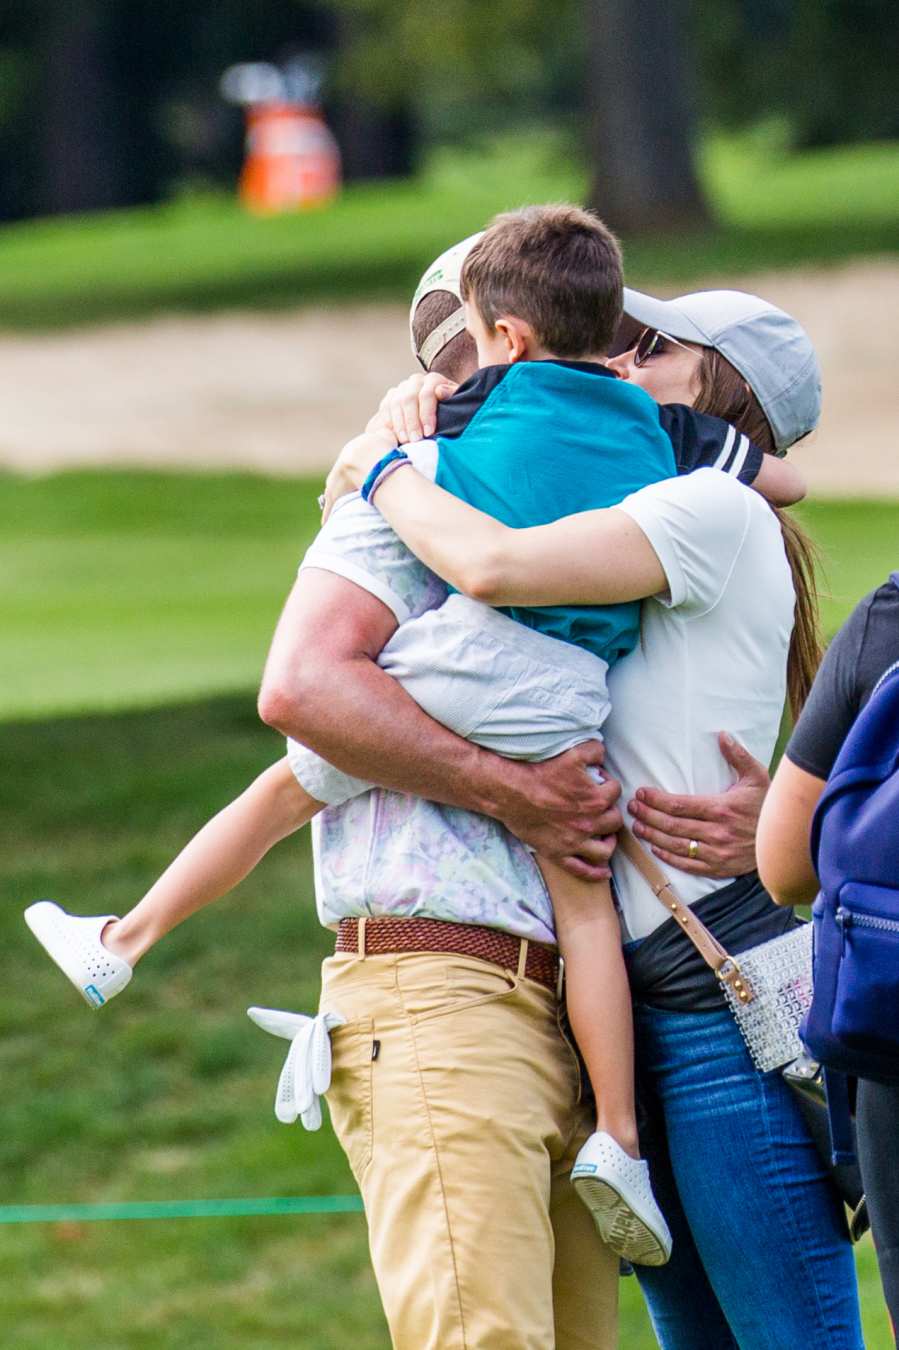 Justin Timberlake Jessica Biel With Son Silas at Golf Course